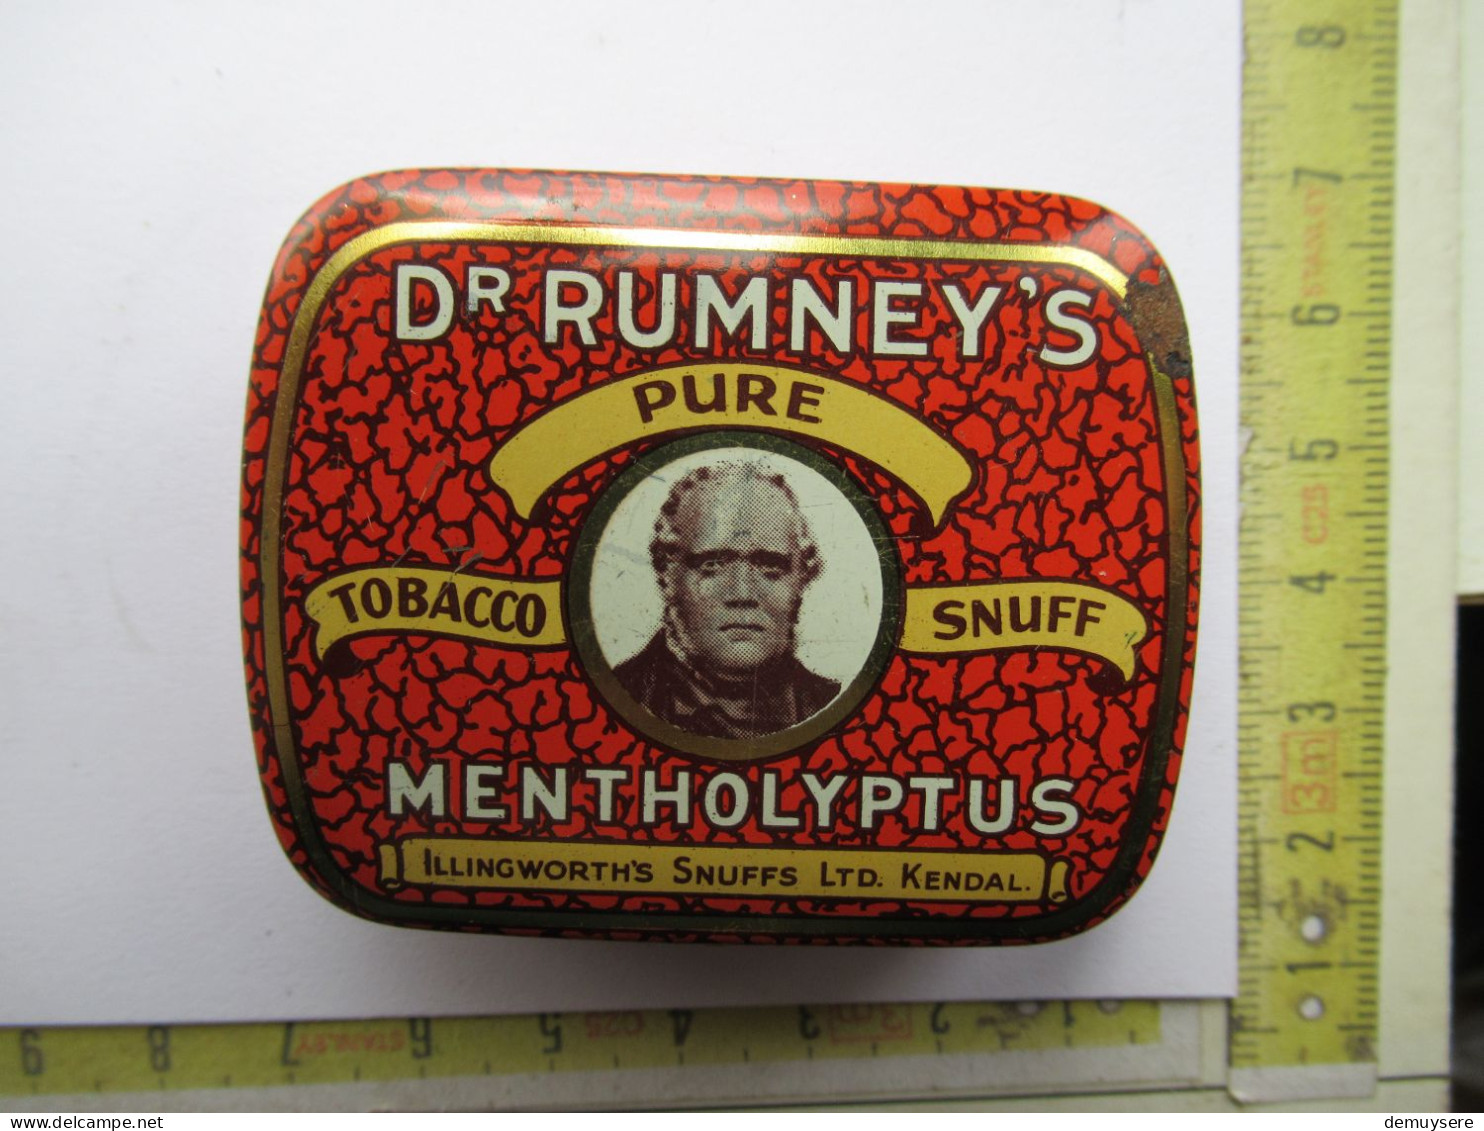 LADE T - DR. RUMNEY'S - PURE TABANCCO SNUFF - MENTHOLYPTUS - Empty Tobacco Boxes